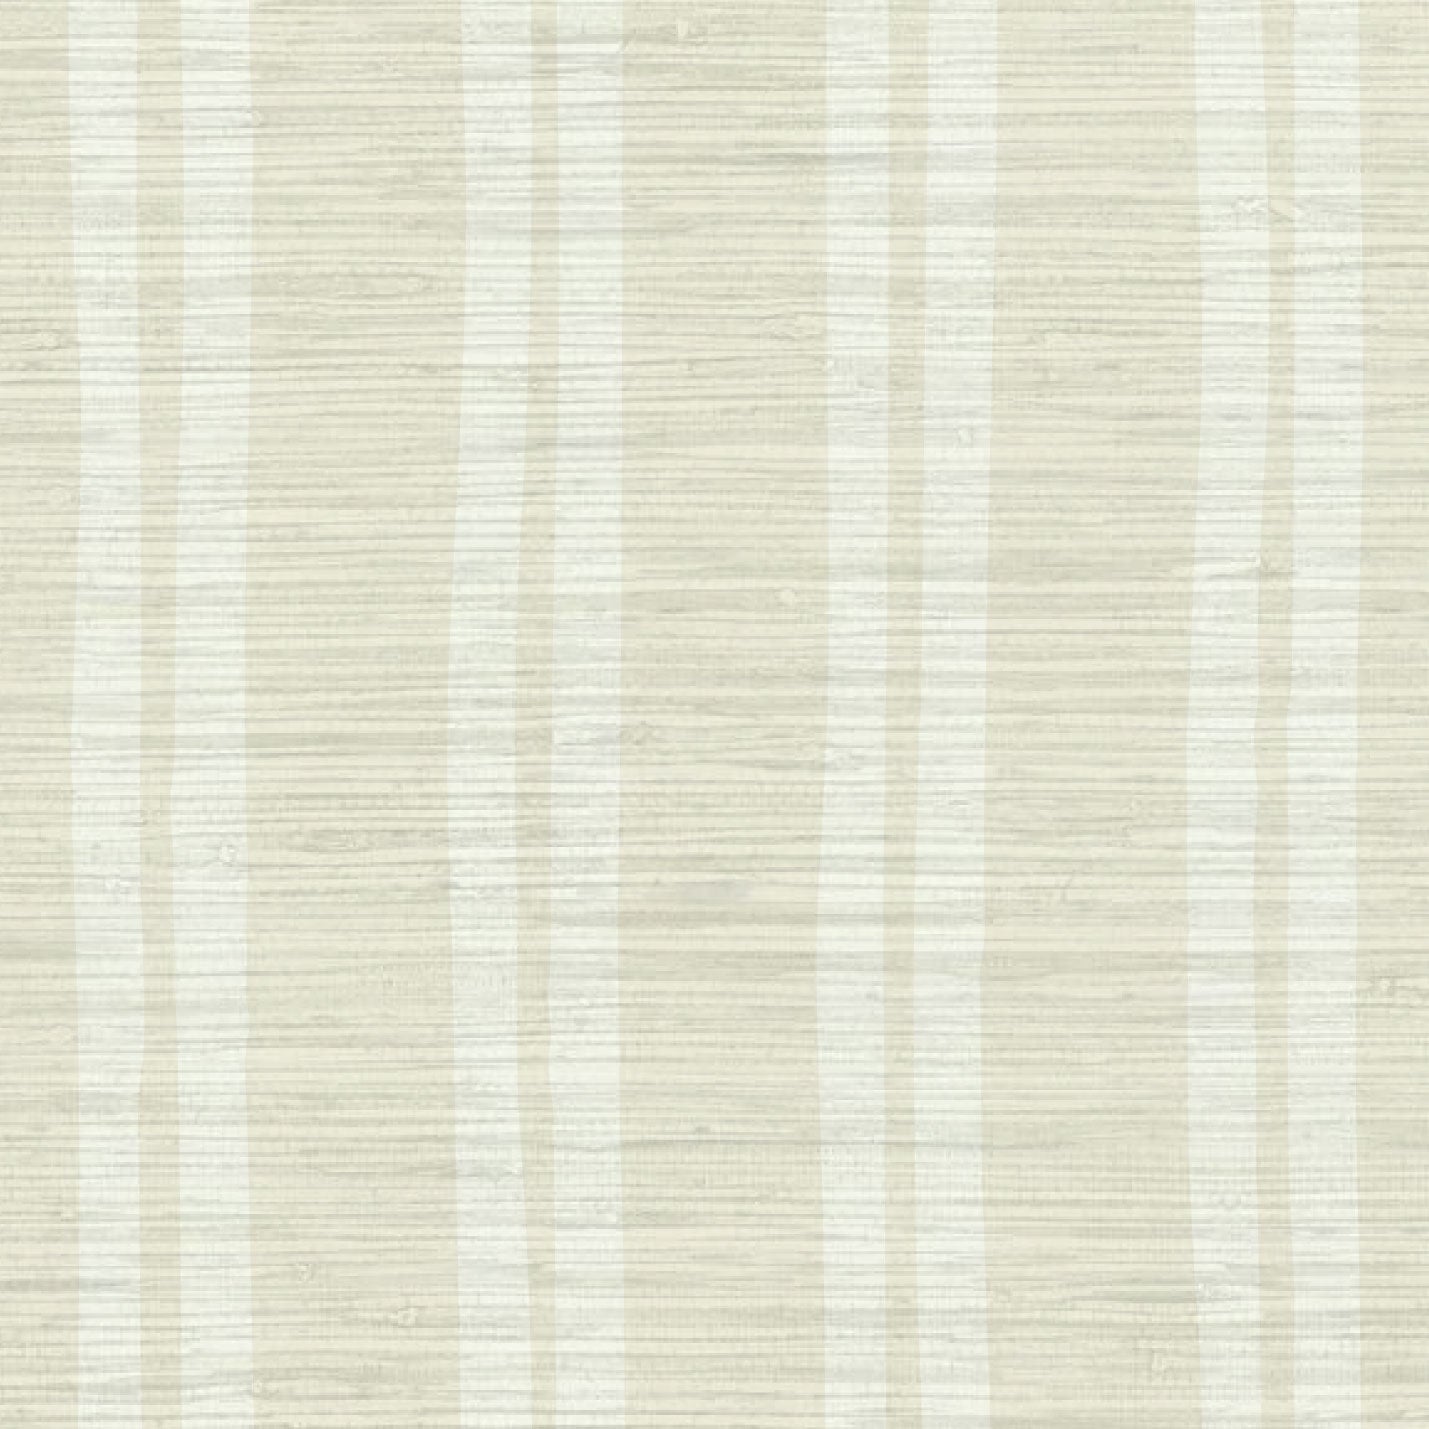 Grasscloth wallpaper Natural Textured Eco-Friendly Non-toxic High-quality Sustainable Interior Design Bold Custom Tailor-made Retro chic Grand millennial Maximalism Traditional Dopamine decor Tropical Jungle Coastal Garden Seaside Seashore Waterfront Retreat Relaxed beach vibes Beach cottage Shoreline Oceanfront Nautical Cabana preppy kids tan sand beige neutral white cream off-white